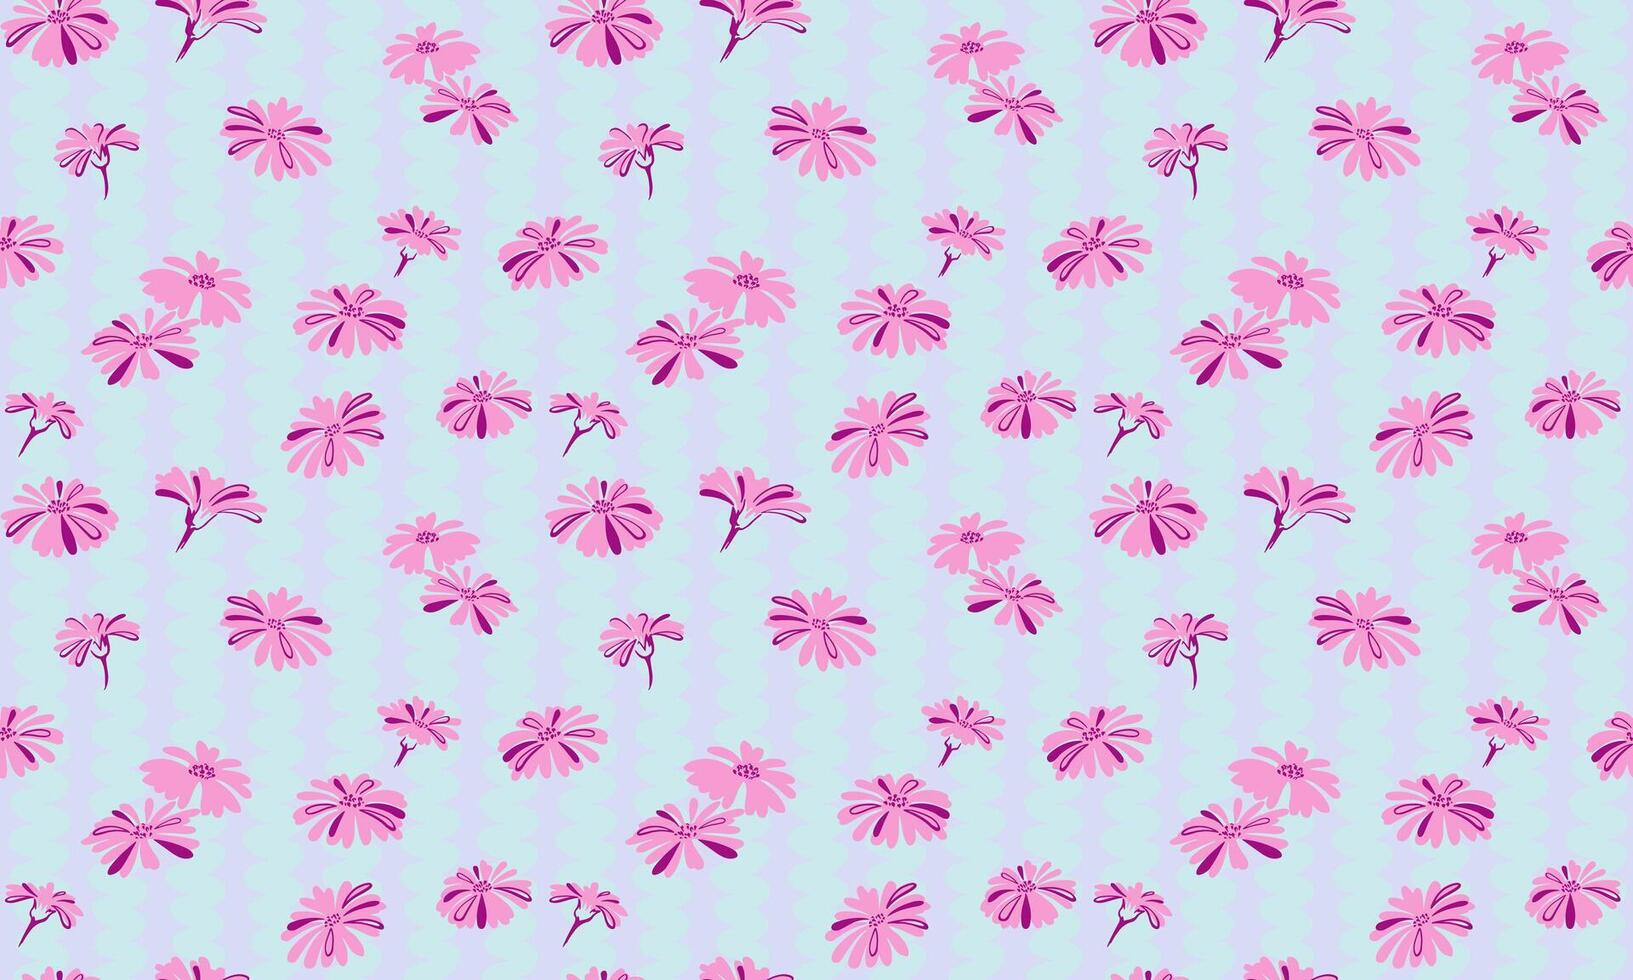 Pink stylized silhouettes flowers and buds seamless pattern on a striped blue background. Simple cute shapes floral background.Vector hand drawn sketch doodle.Template for design, printing vector